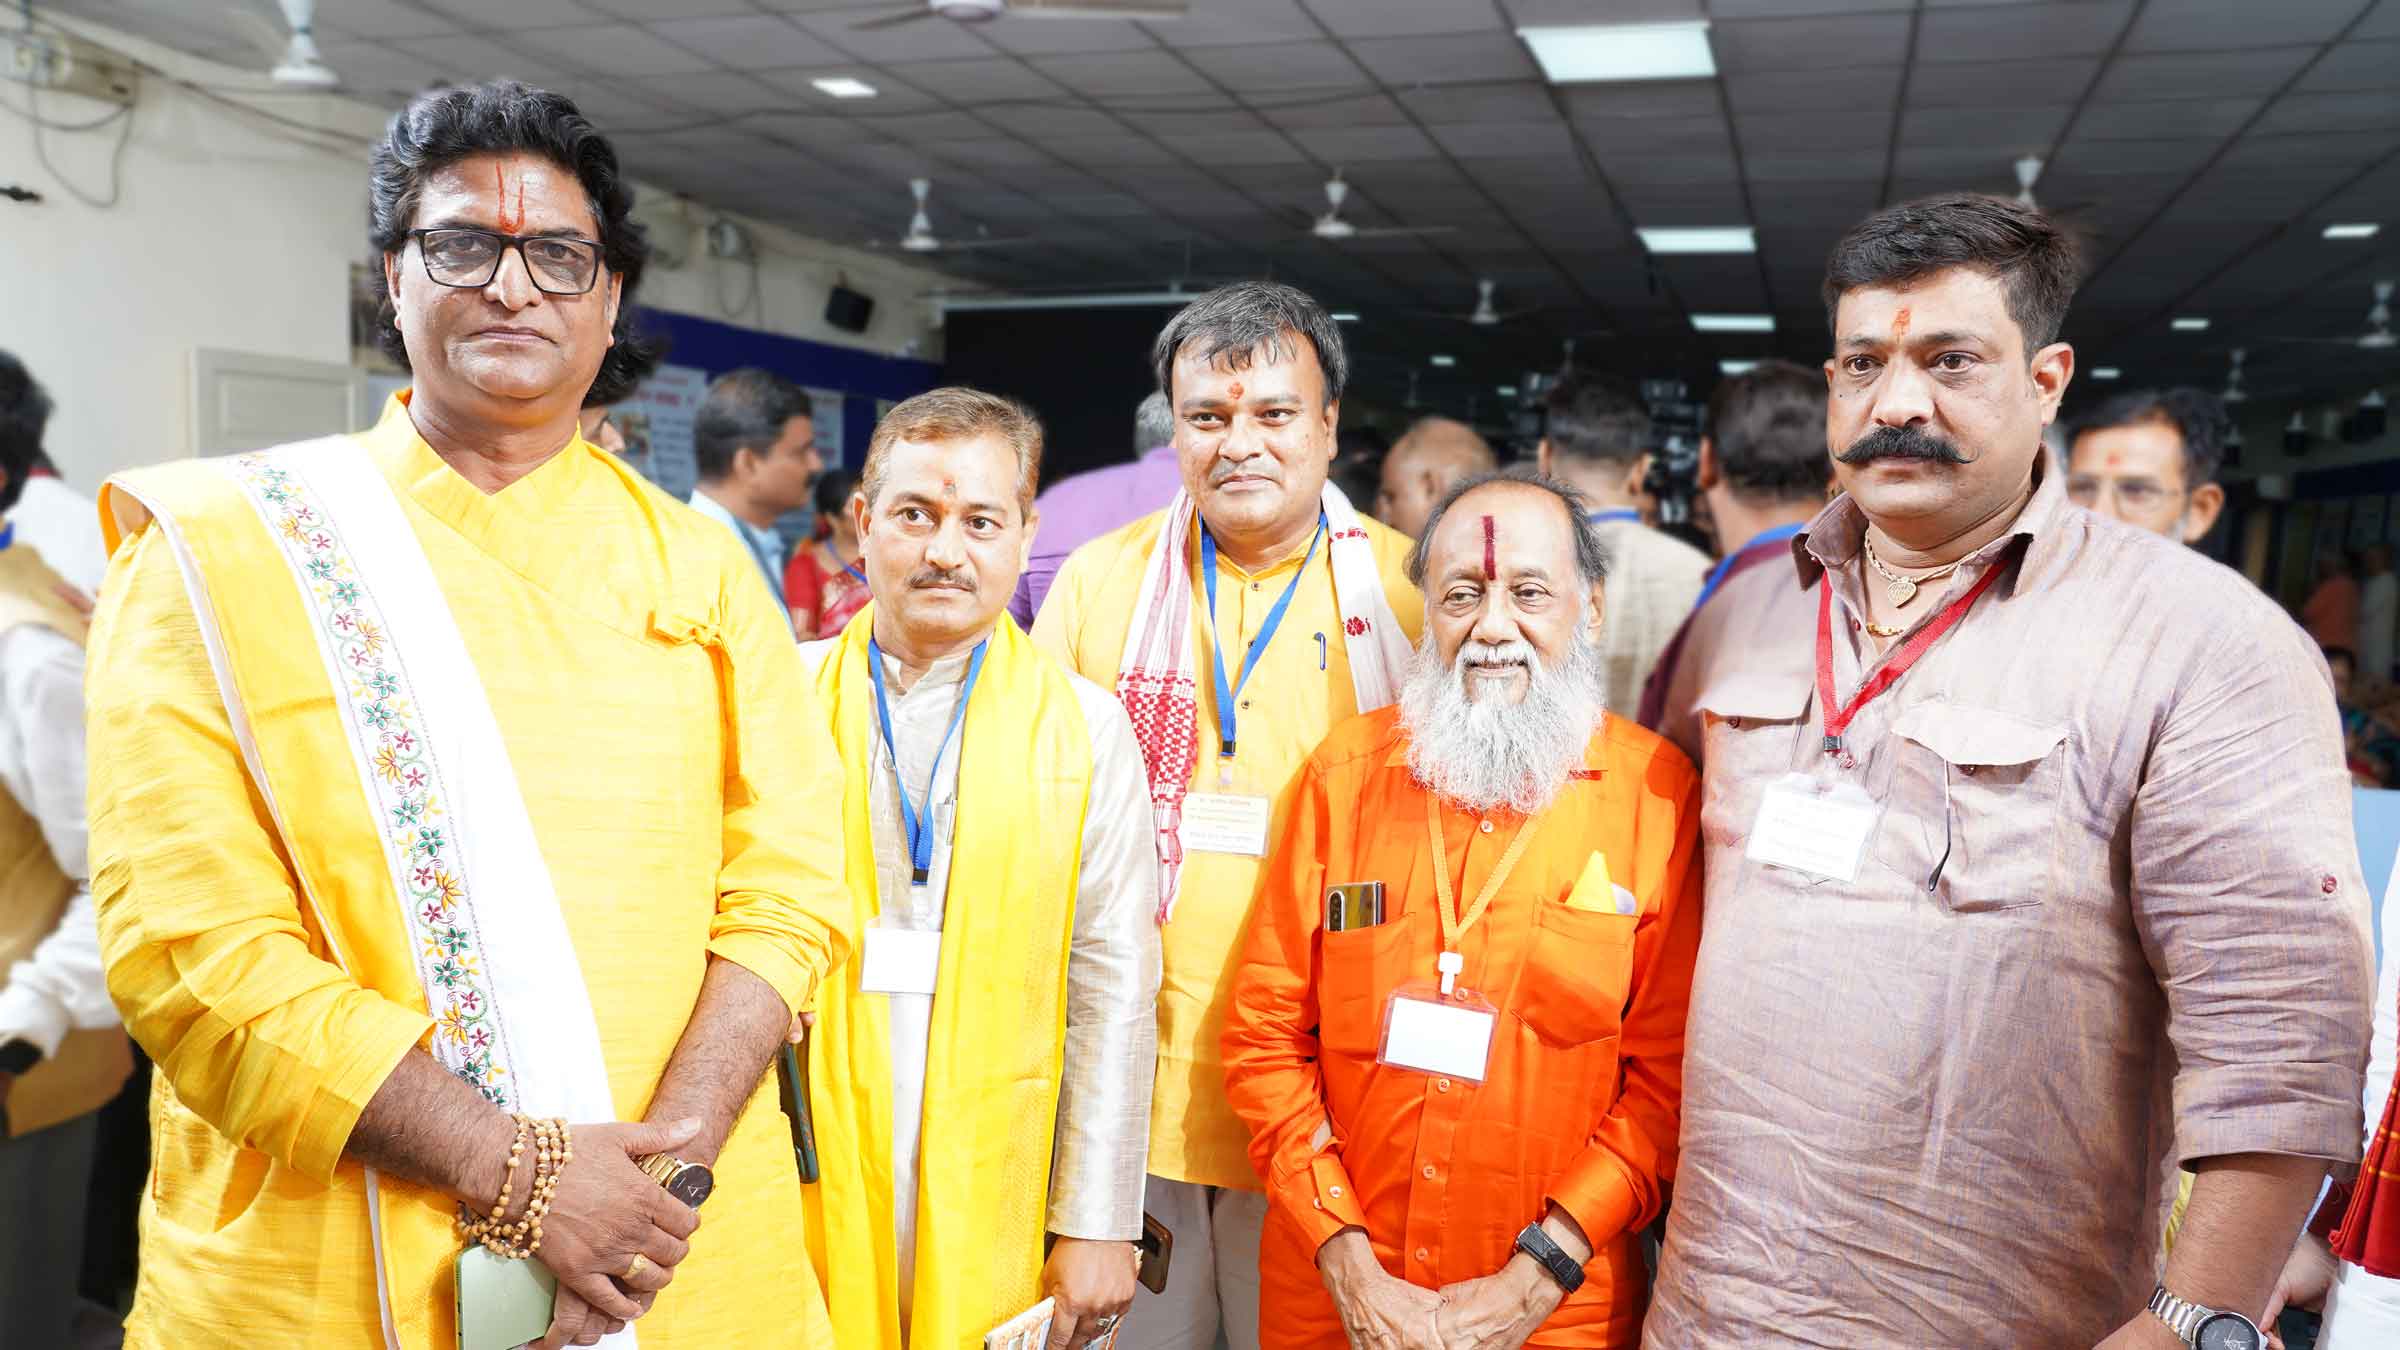 (Second from right) H.H. (Adv.) Hari Shankar Jain (Advocate, Supreme Court of India and President, Hindu Front for Justice) with devout Hindus